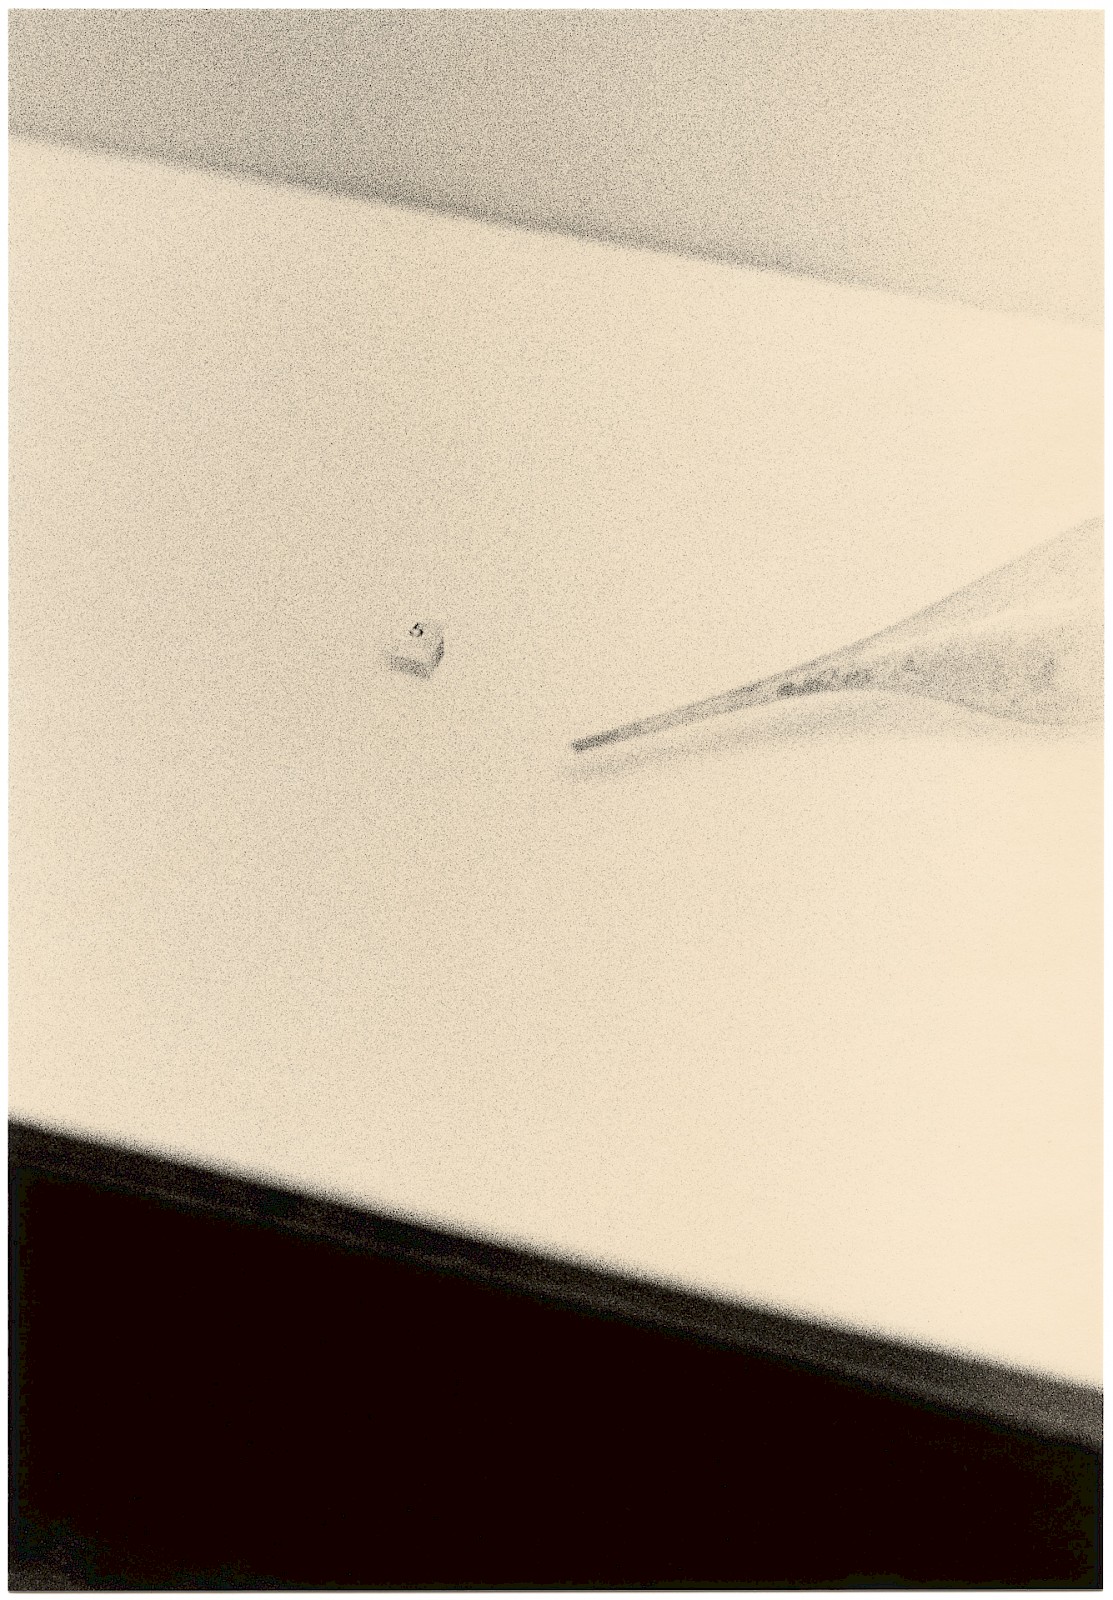 Untitled (object no 5), silver gelatin photograph by Mikael Siirilä